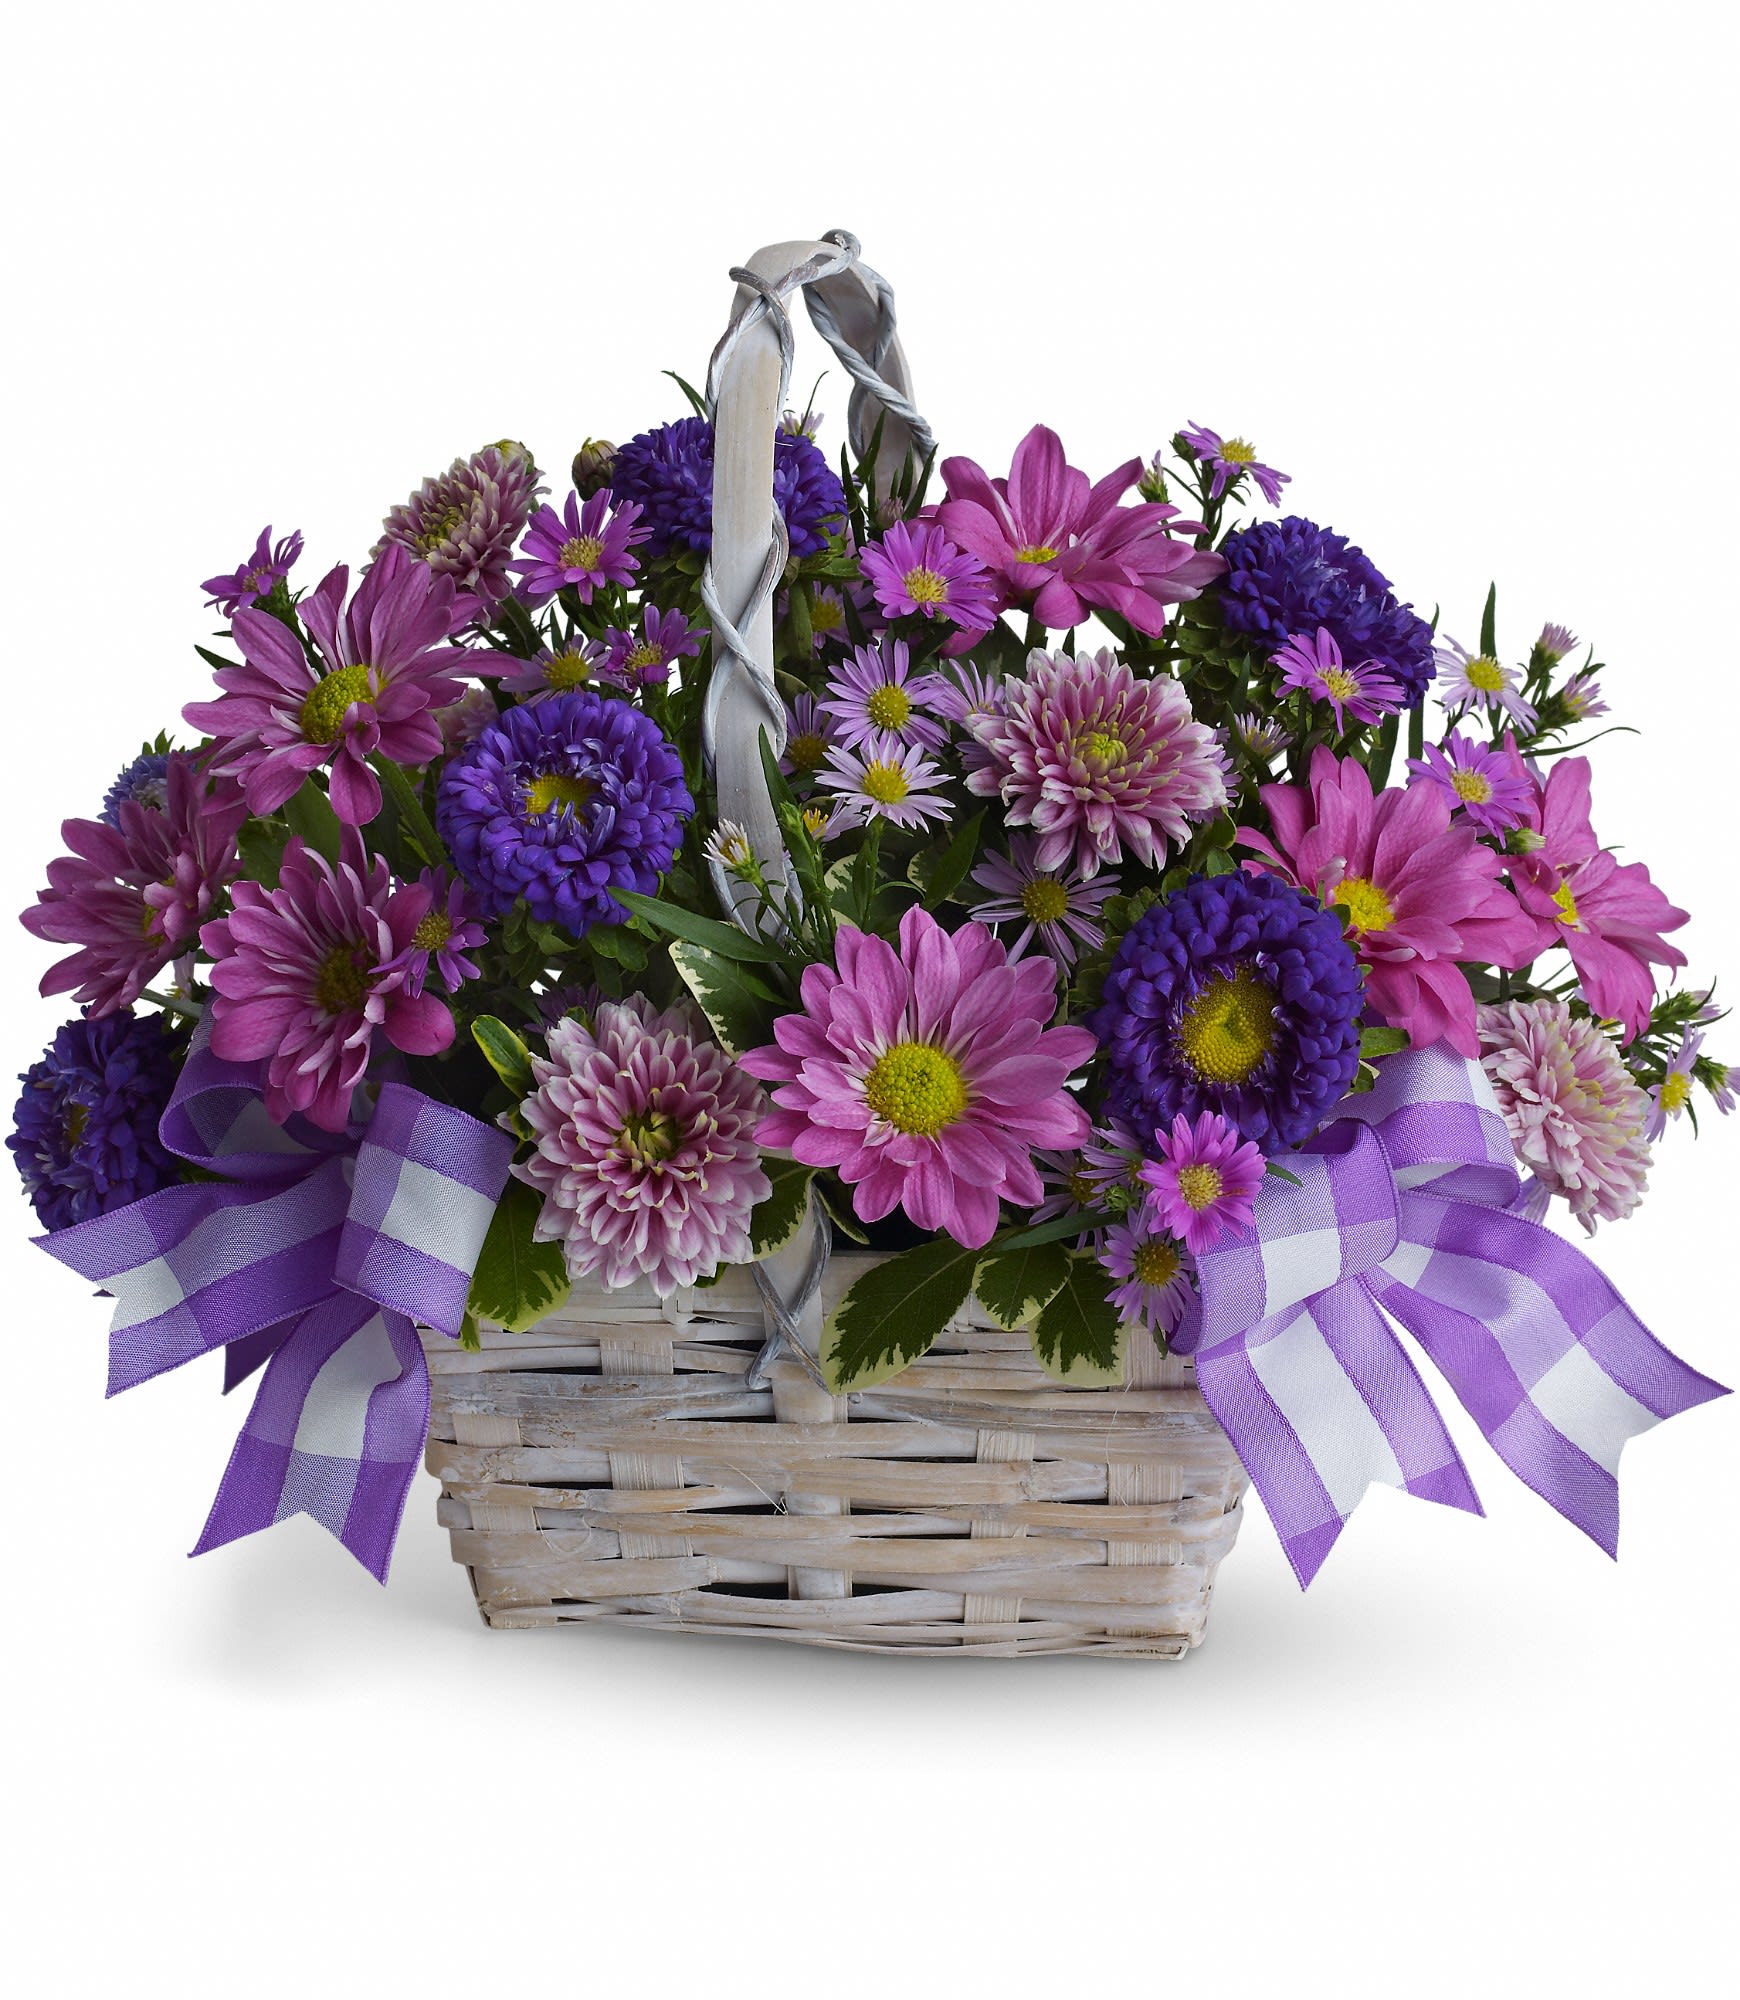 Daisy Daydreams by Teleflora - Get a handle on spring with this delightful array of floral favorites in a charming white bamboo basket accented with lavender ribbon. Surprise someone who could use a lift. It will make you both happy.